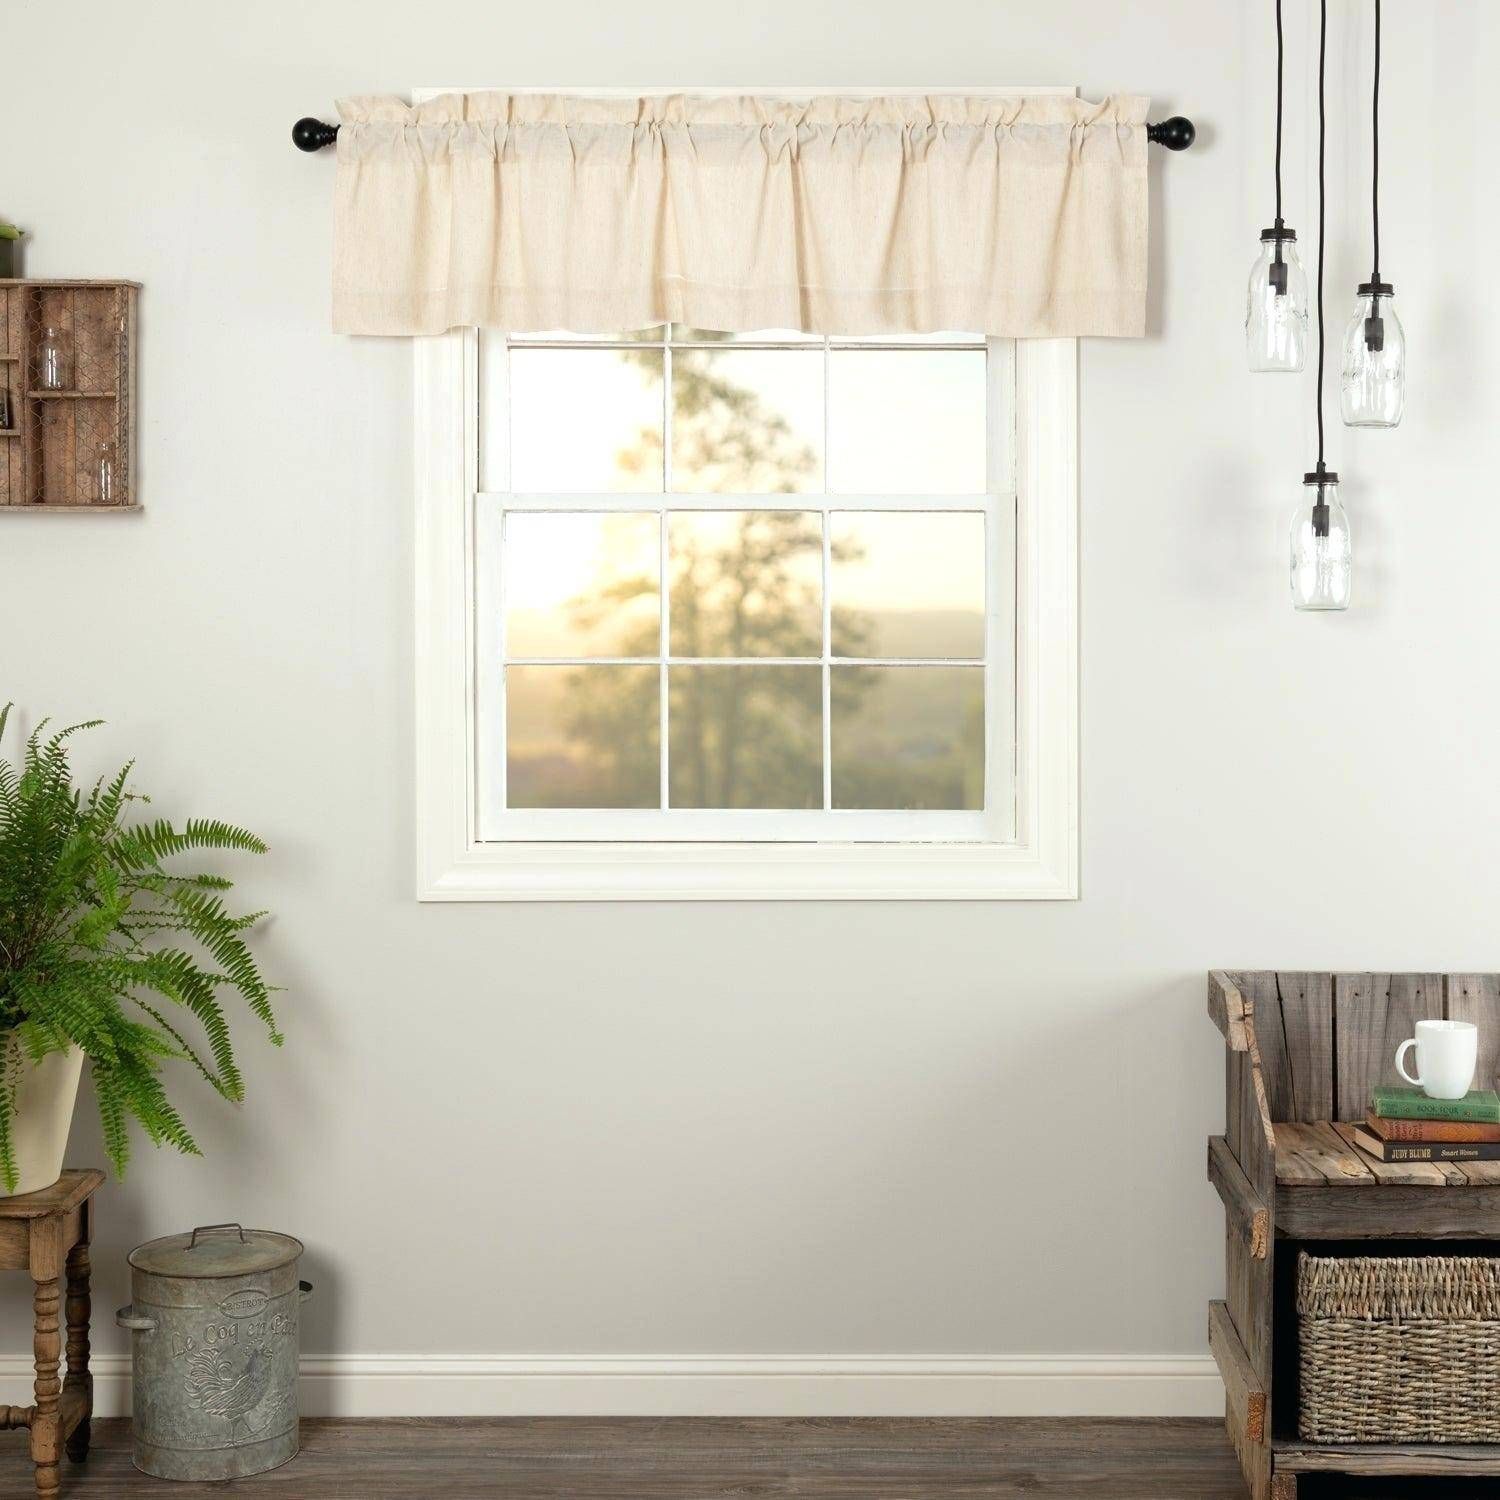 Farmhouse Valance Rustic Valances Modern Window For Kitchen Inside Red Rustic Kitchen Curtains (View 9 of 20)